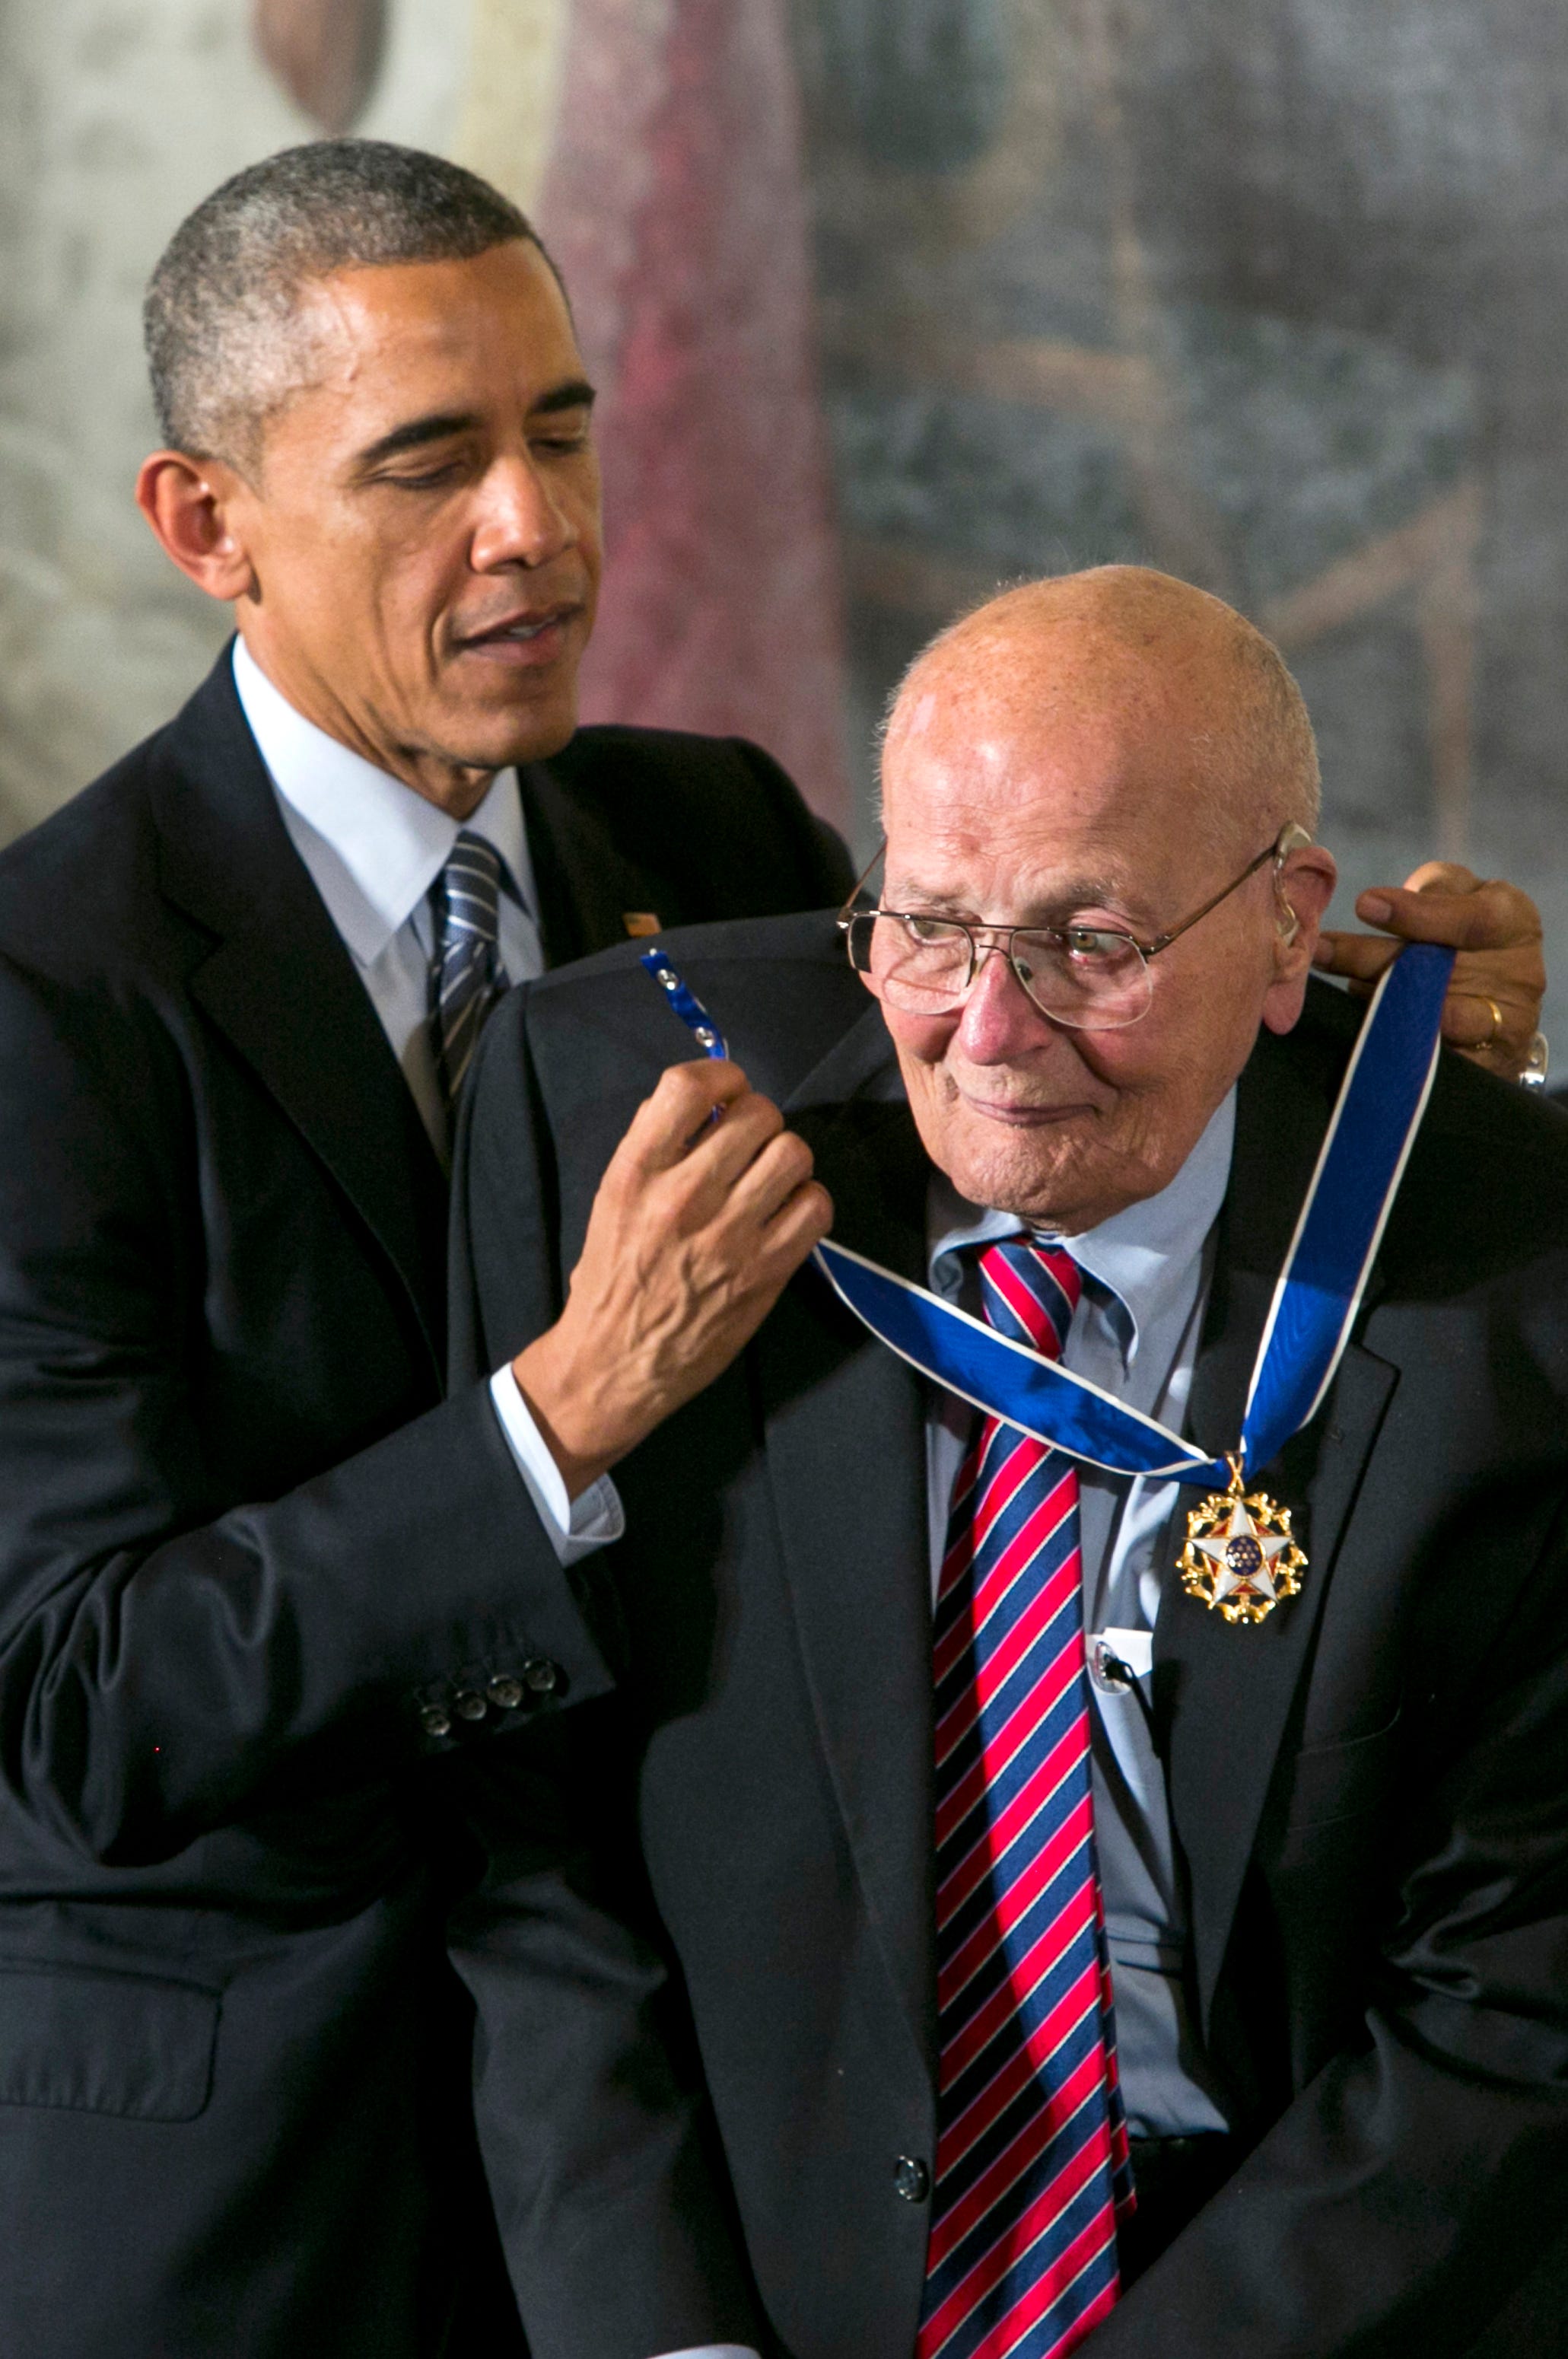 President Barack Obama awards Rep.  John Dingell Jr. the Presidential Medal of Honor at the White House on November 24, 2014. It is the nation’s highest civilian honor, presented to individuals who have made especially meritorious contributions to the security or national interests of the United States.  Obama described Dingell as “one of the most influential legislators of all time.”